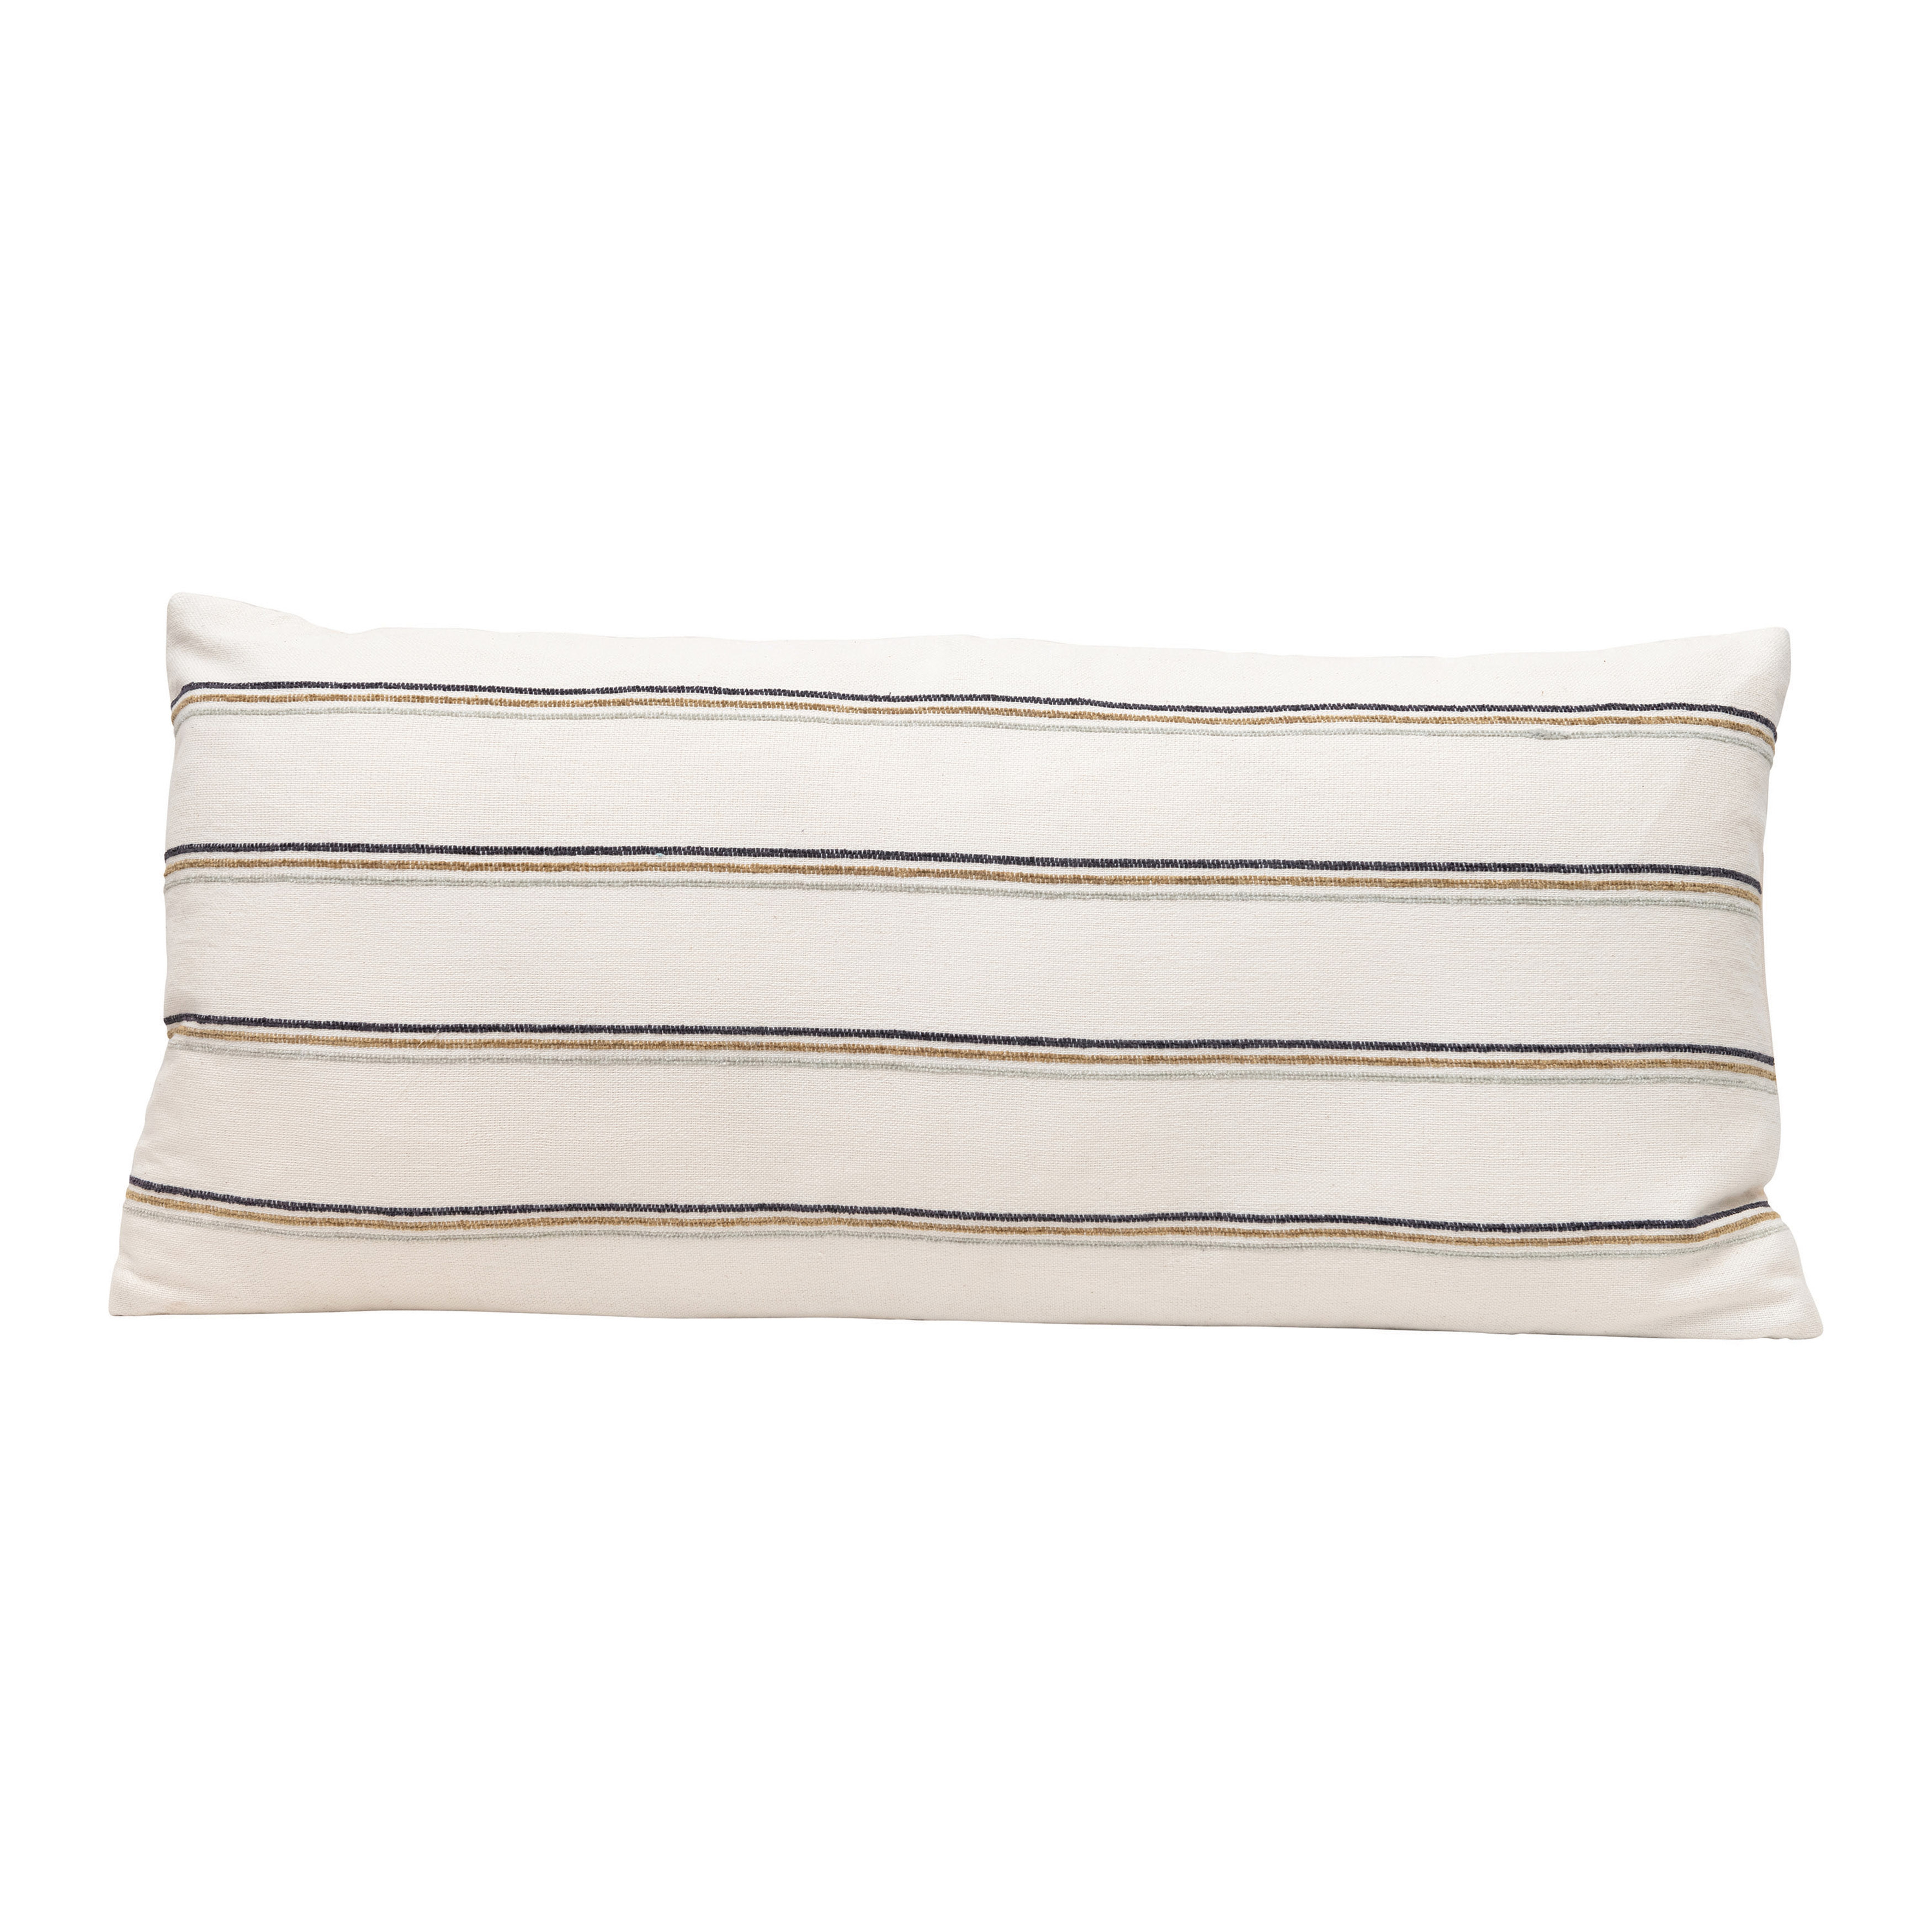 Woven Cotton Blend Lumbar Pillow with Stripes, Multi Color - Nomad Home